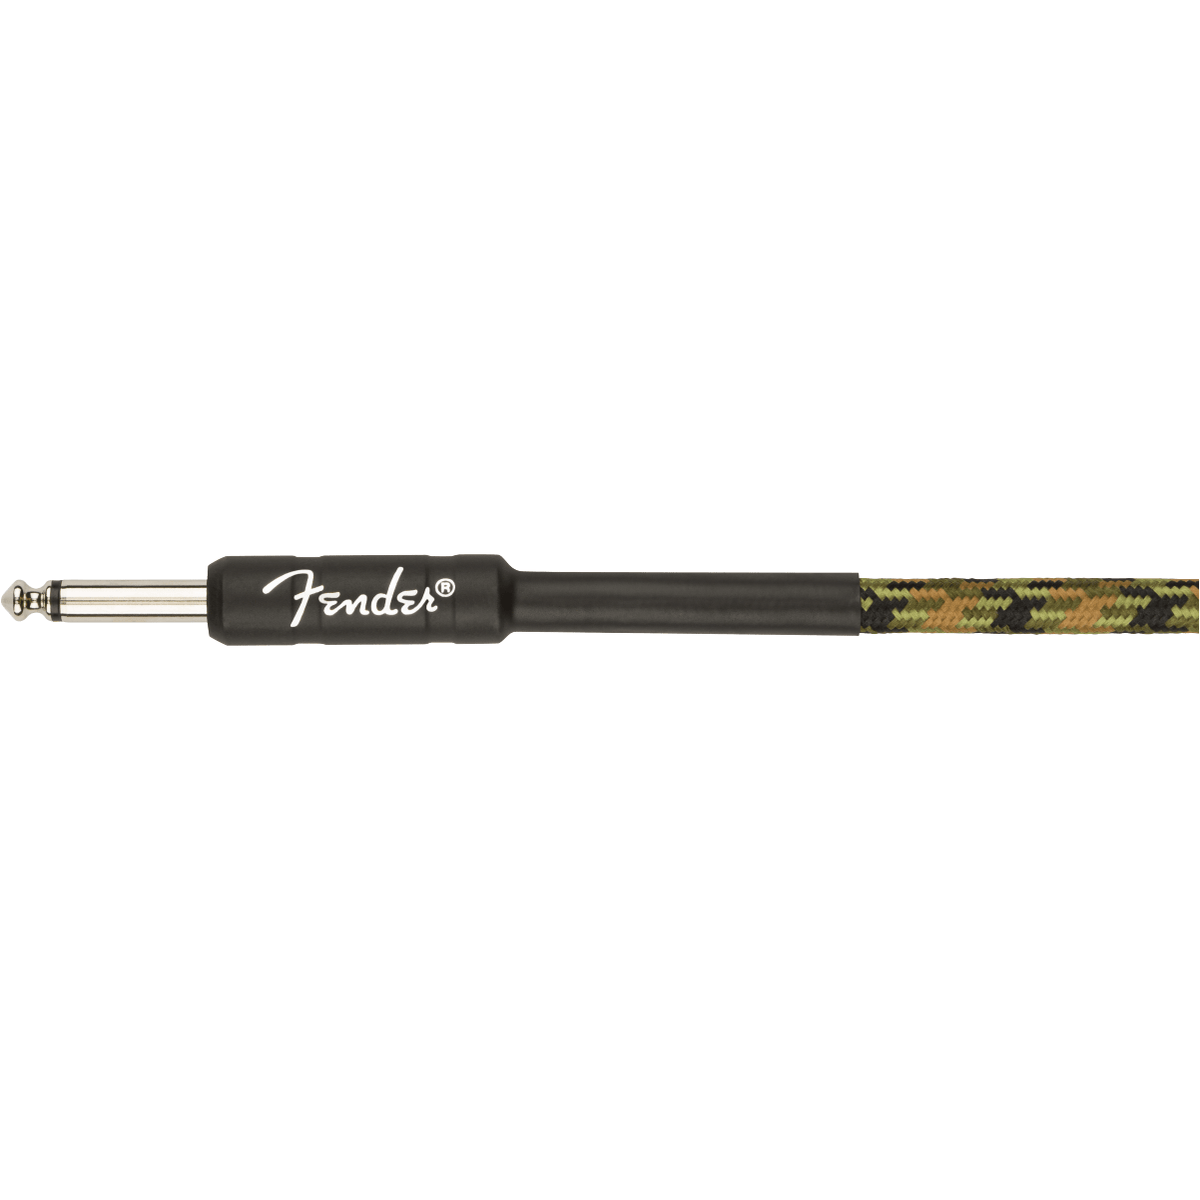 Fender Guitar Accessories Fender Guitar Cable Professional Series 10FT Woodland Camo - Byron Music